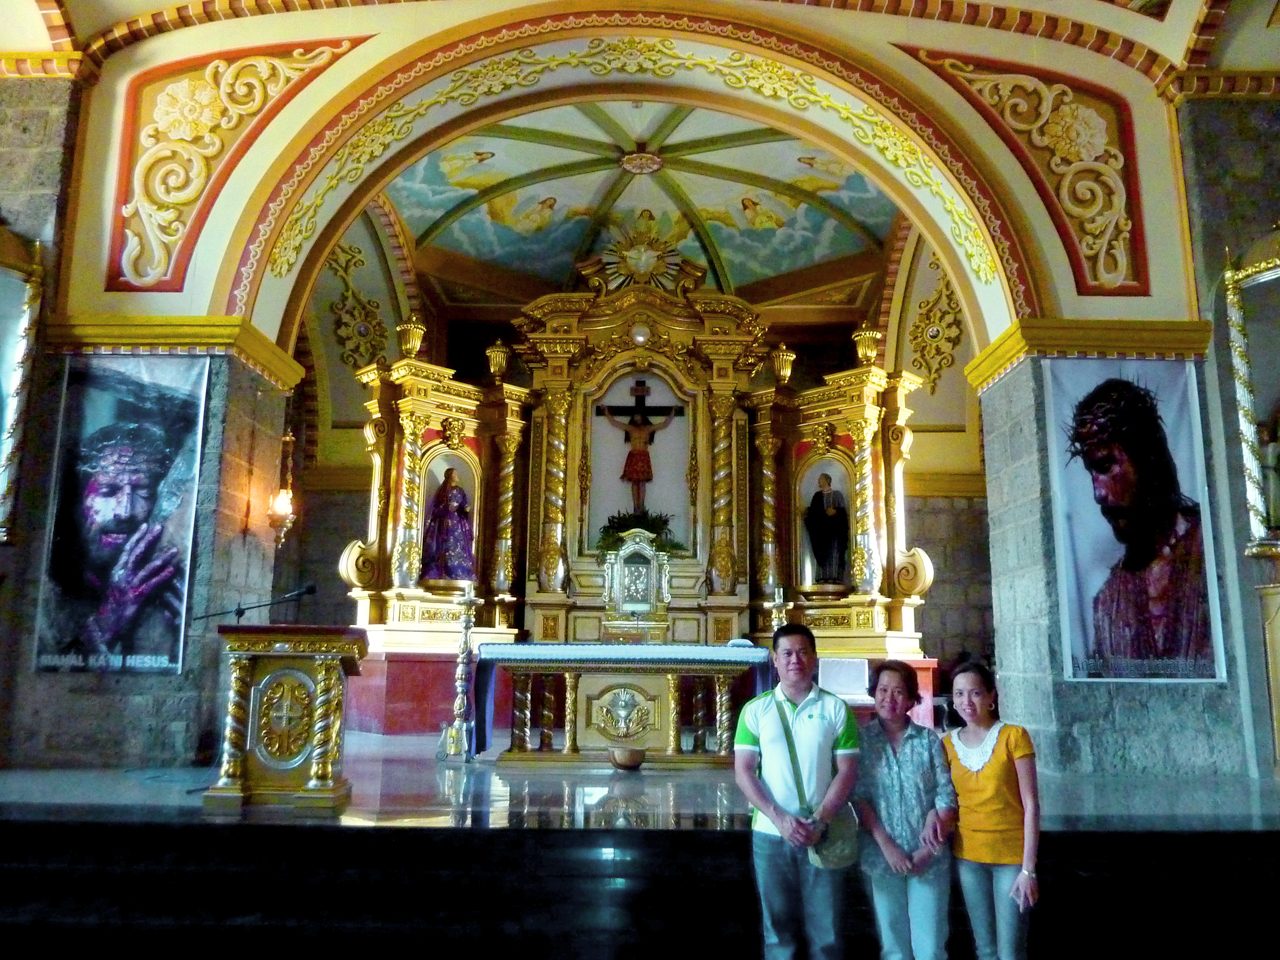 3-MAN TEAM. Green Faith Travels' facilitators (from left) Edwin Galvez, Larissa Bardos, and Judit Mangahis before the main altar of St. Mary Magdalene Parish Church in Pililla, one of the oldest churches in Rizal province. Photo from Green Faith Travelers 